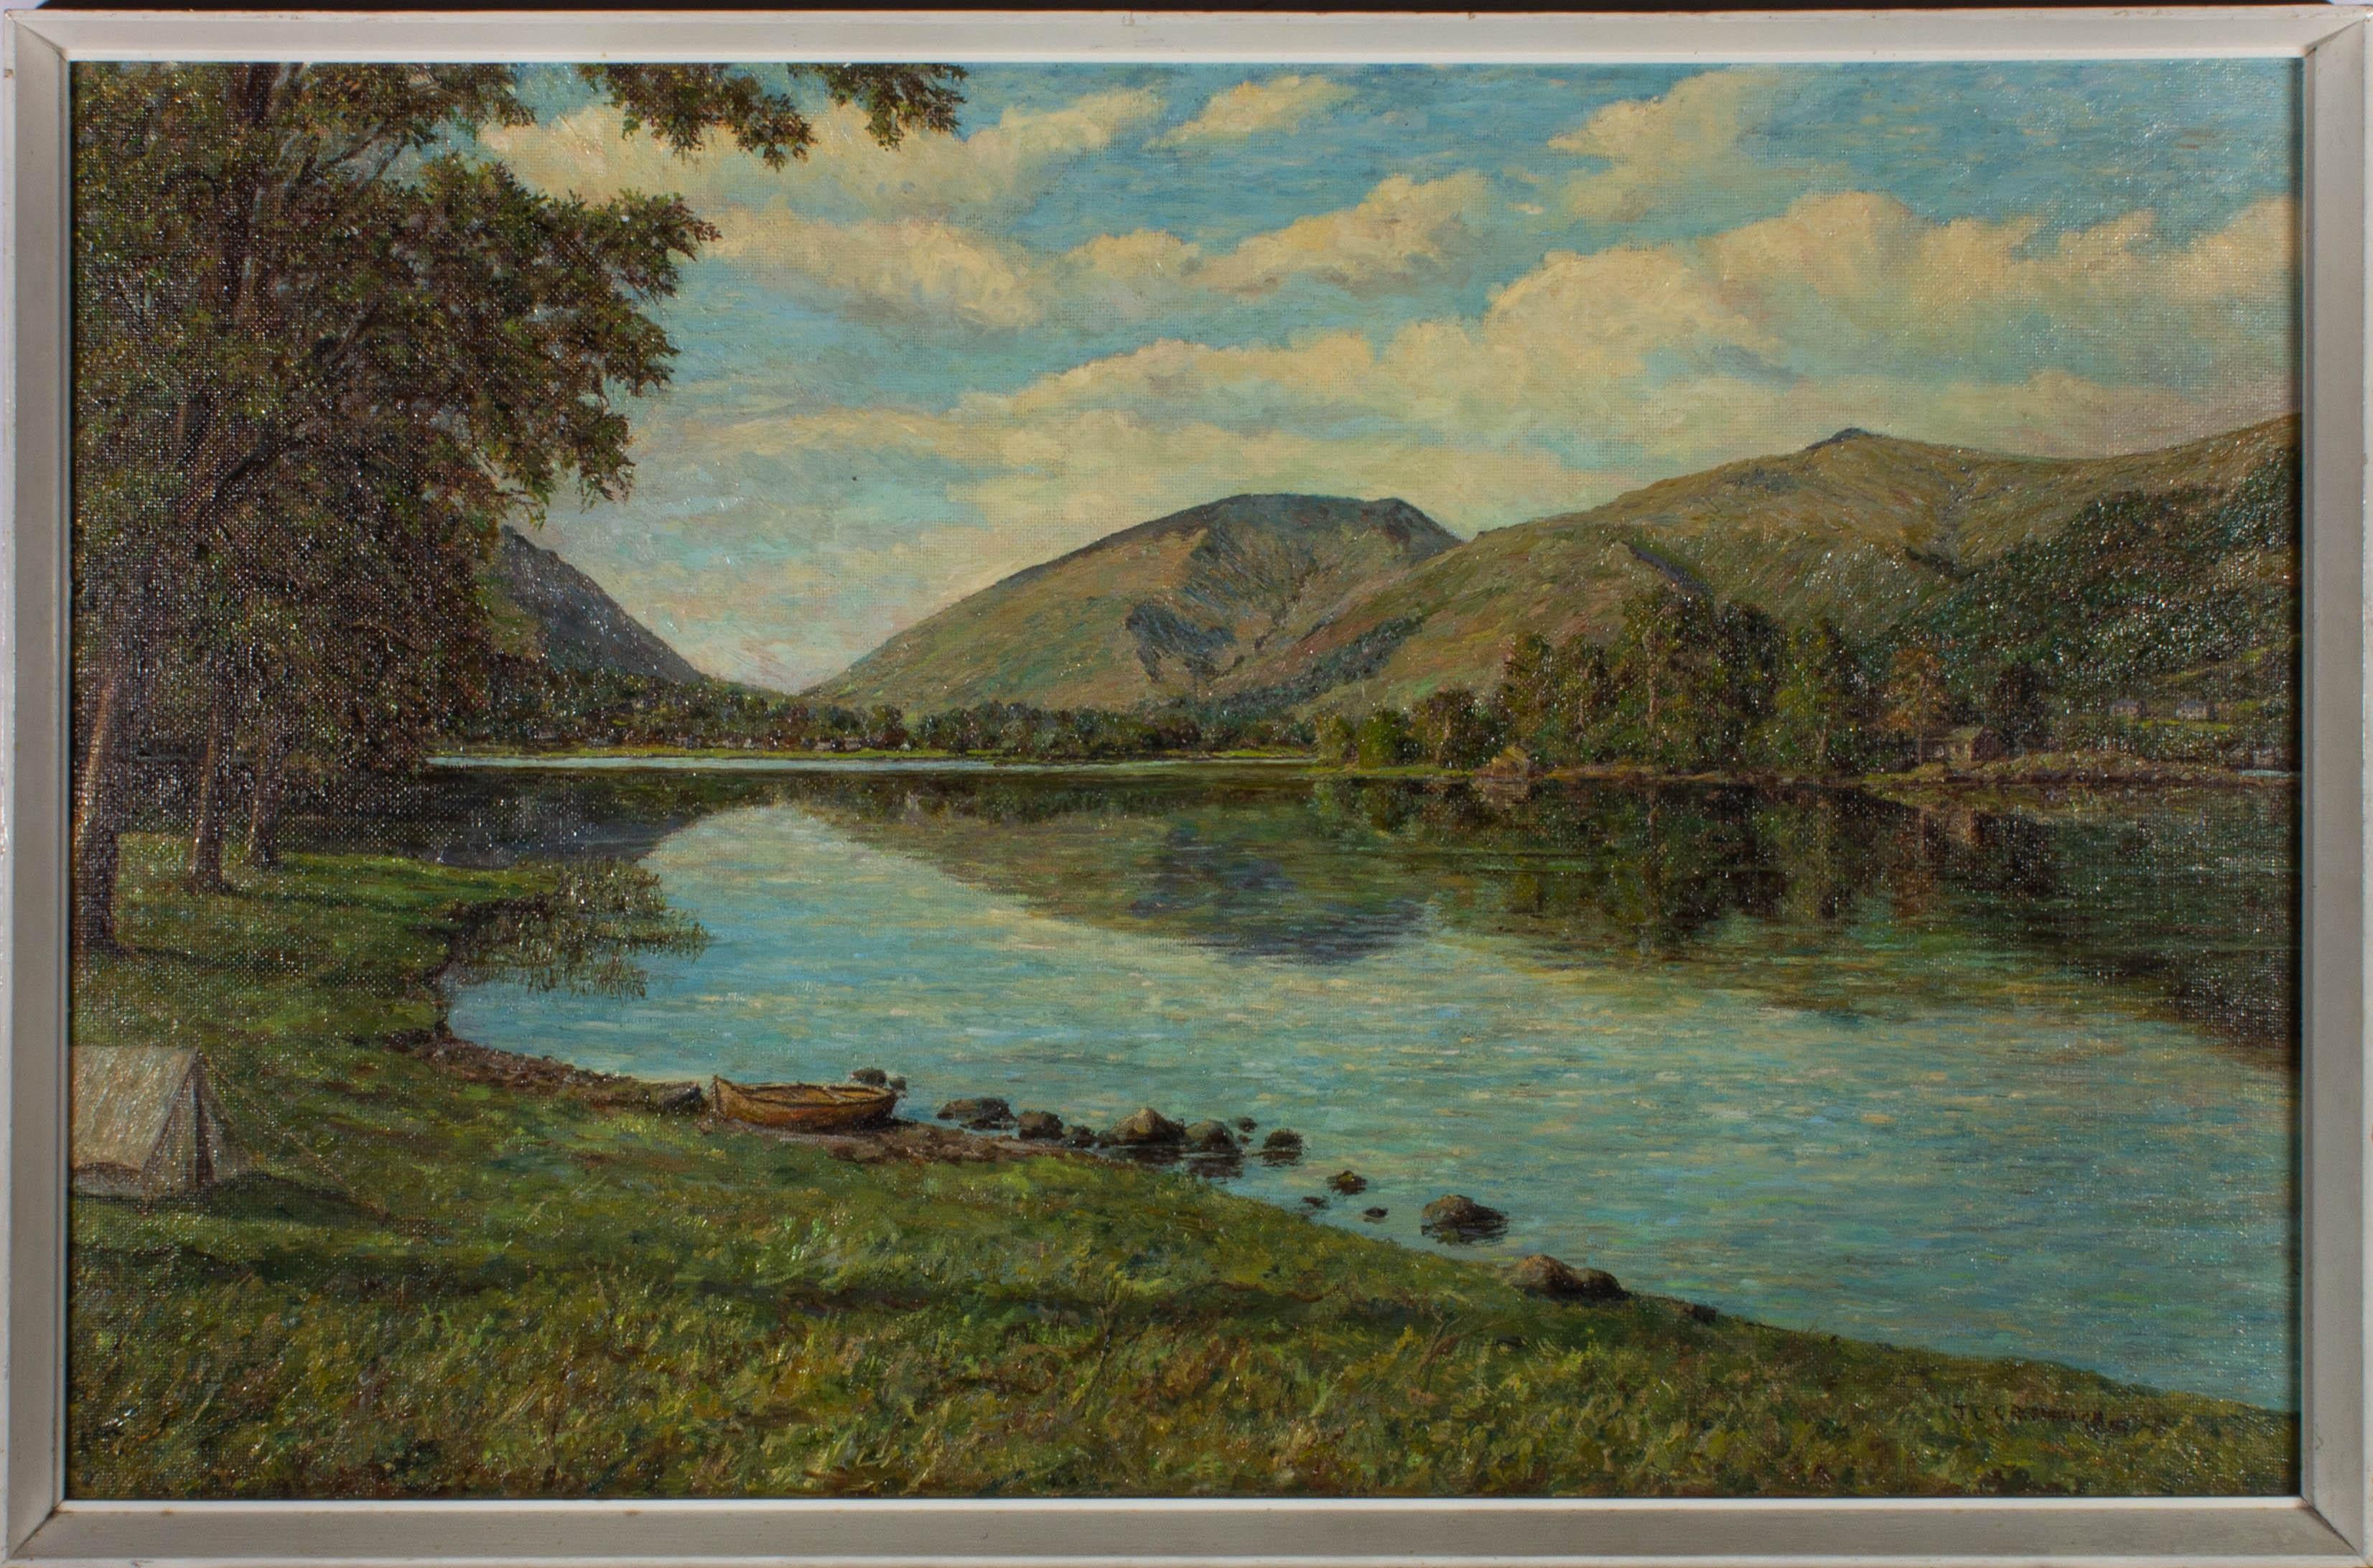 A Lake District scene depicting the view across Grasmere lake towards Helvellyn. Presented in a white painted wooden frame. Signed to the lower-right edge. Artist's label on the verso that includes the location. On board.
